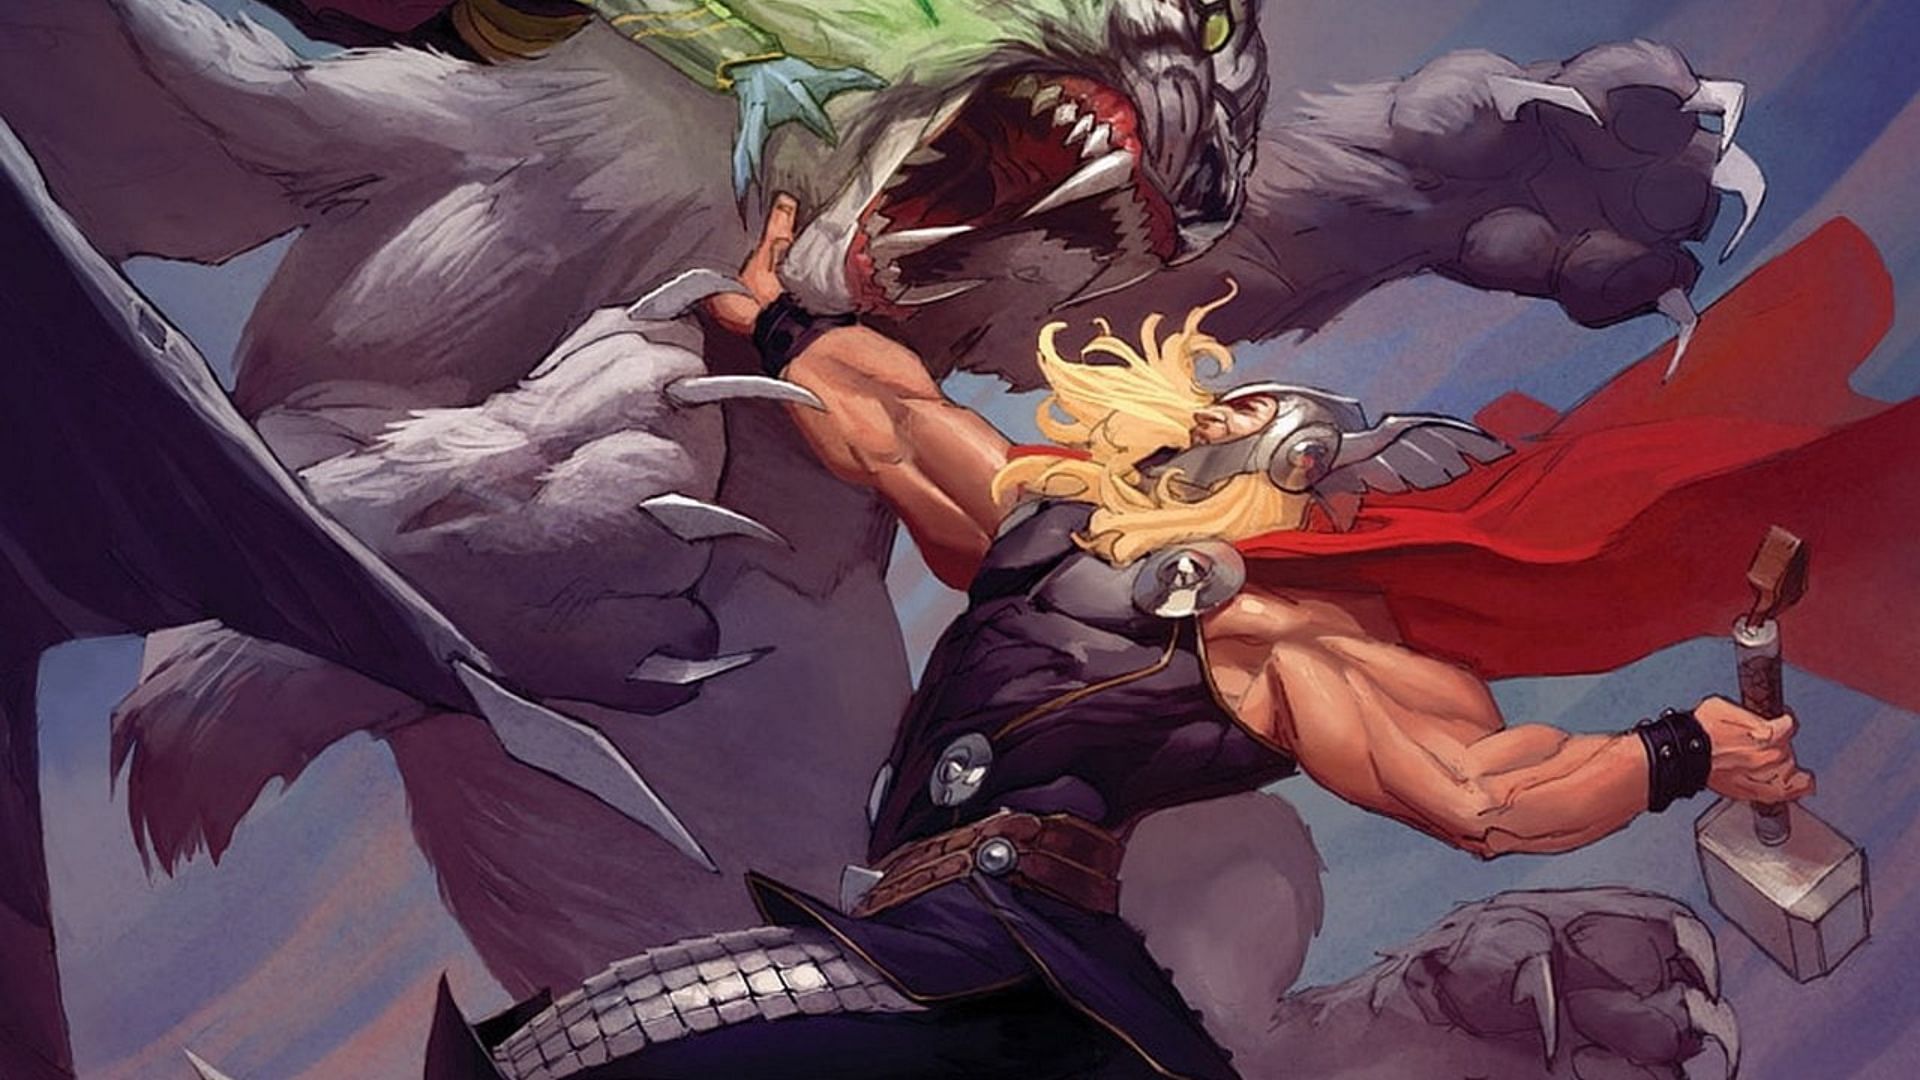 Thor: God of Thunder, crafted by writer Jason Aaron and artist Esad Ribic, stands out as one of the finest Marvel Comics. (Image Via Marvel)